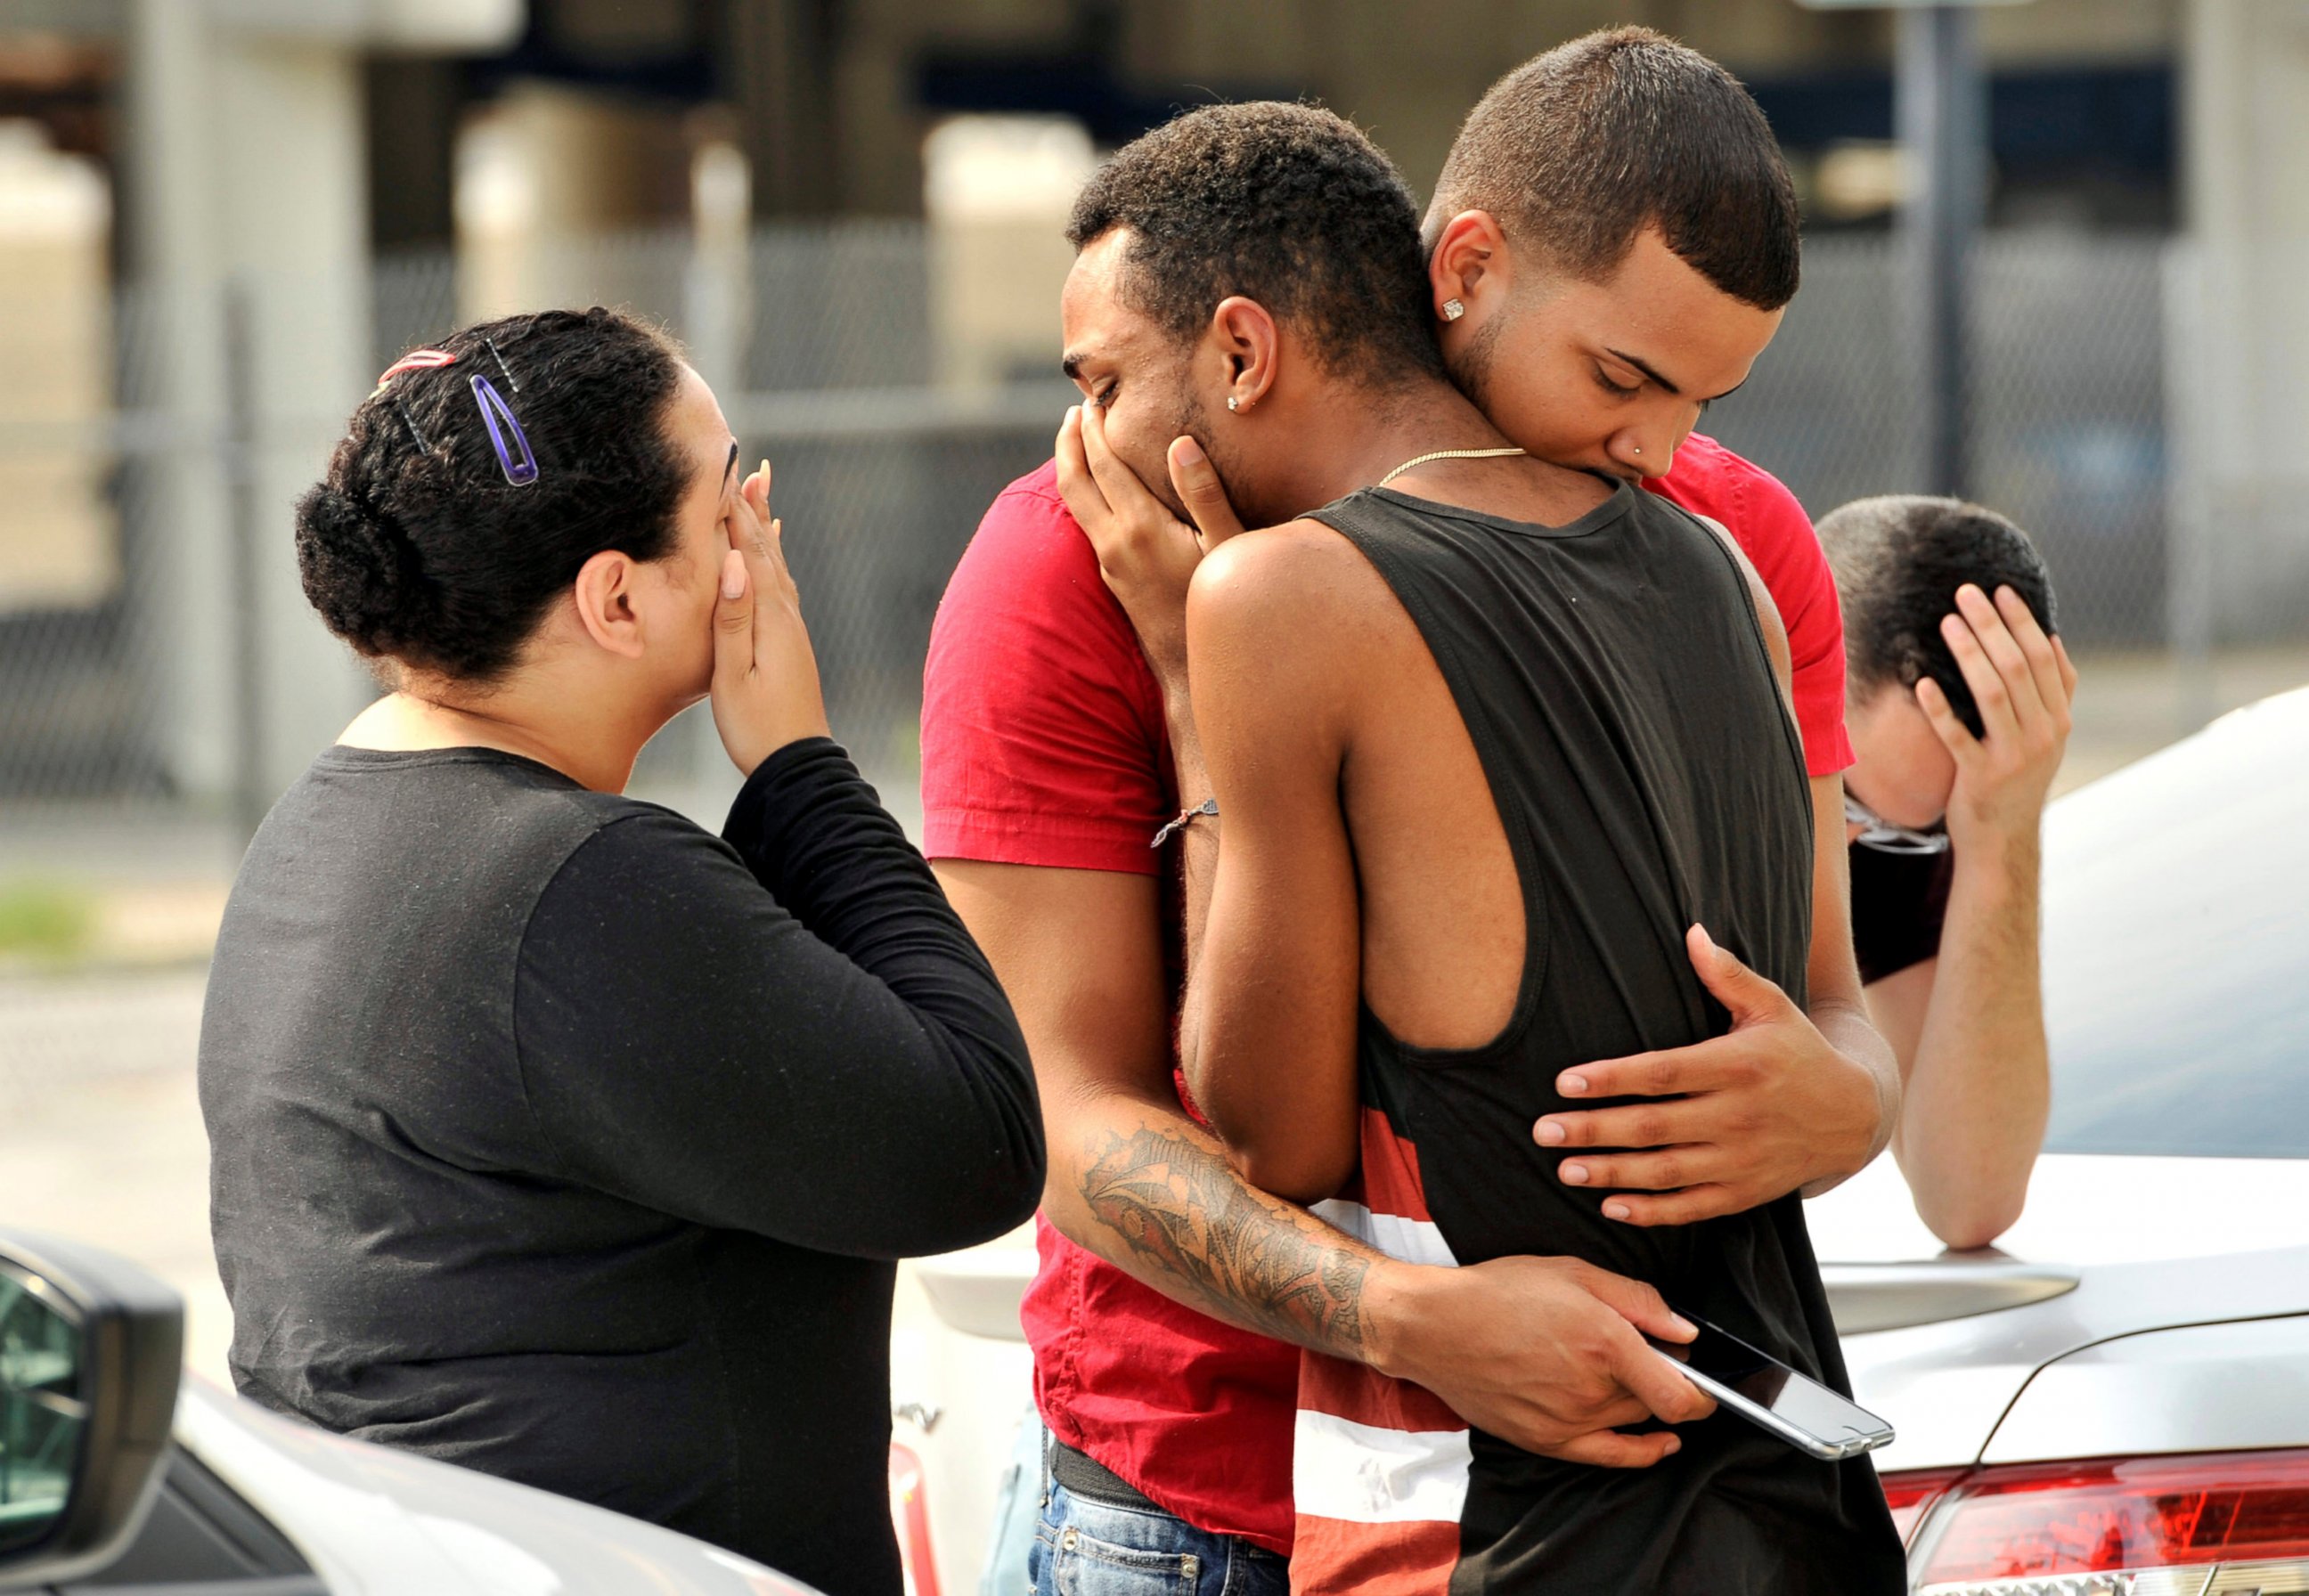 PHOTO: Friends and family members embrace outside the Orlando Police Headquarters during the investigation of a shooting at the Pulse night club, after a gunman opened fire, in Orlando, Fla., June 12, 2016.